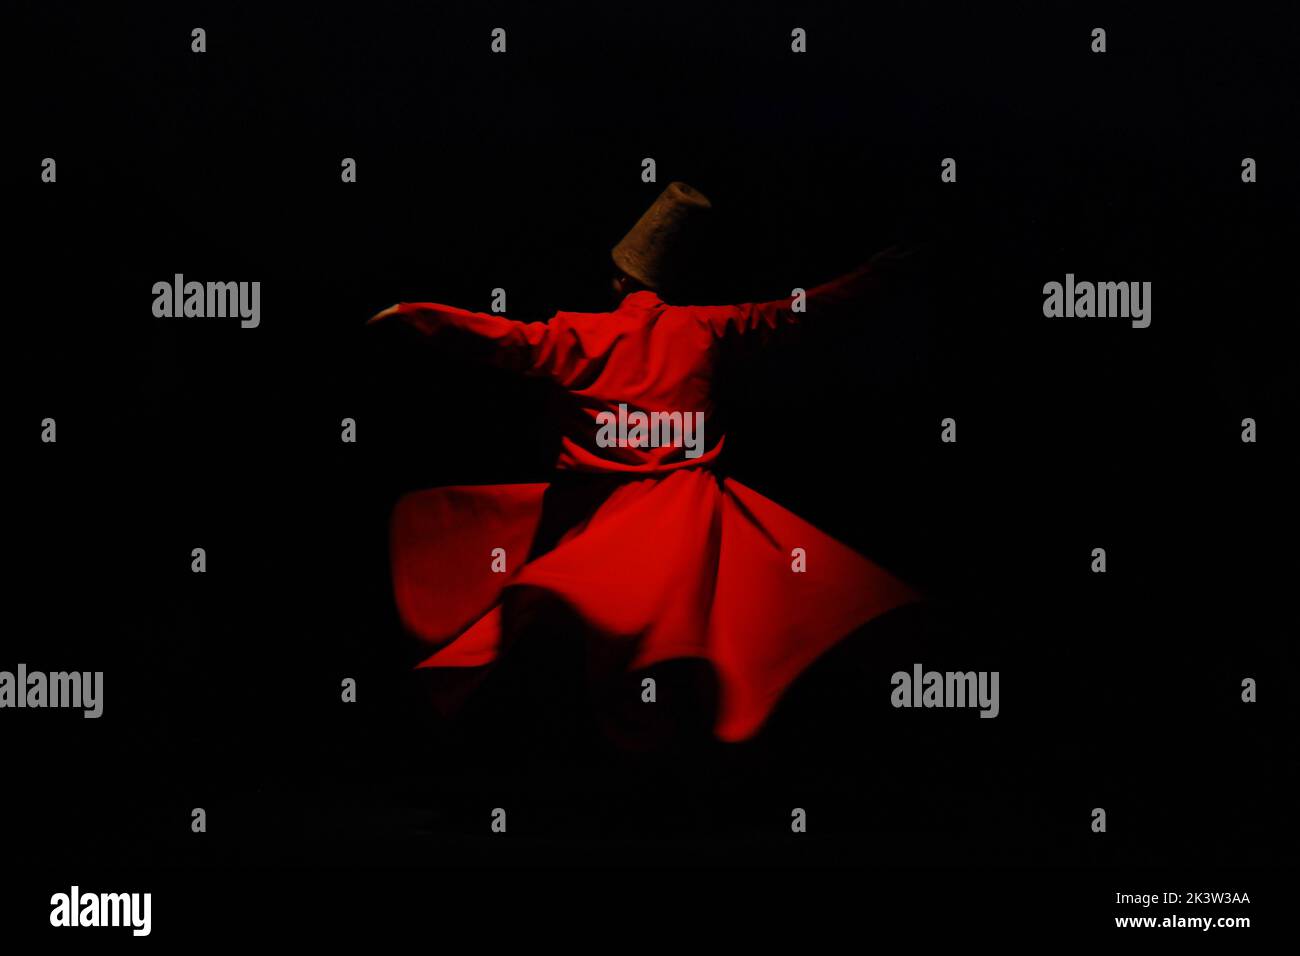 A person in a red dervish costume spinning on a black background Stock Photo